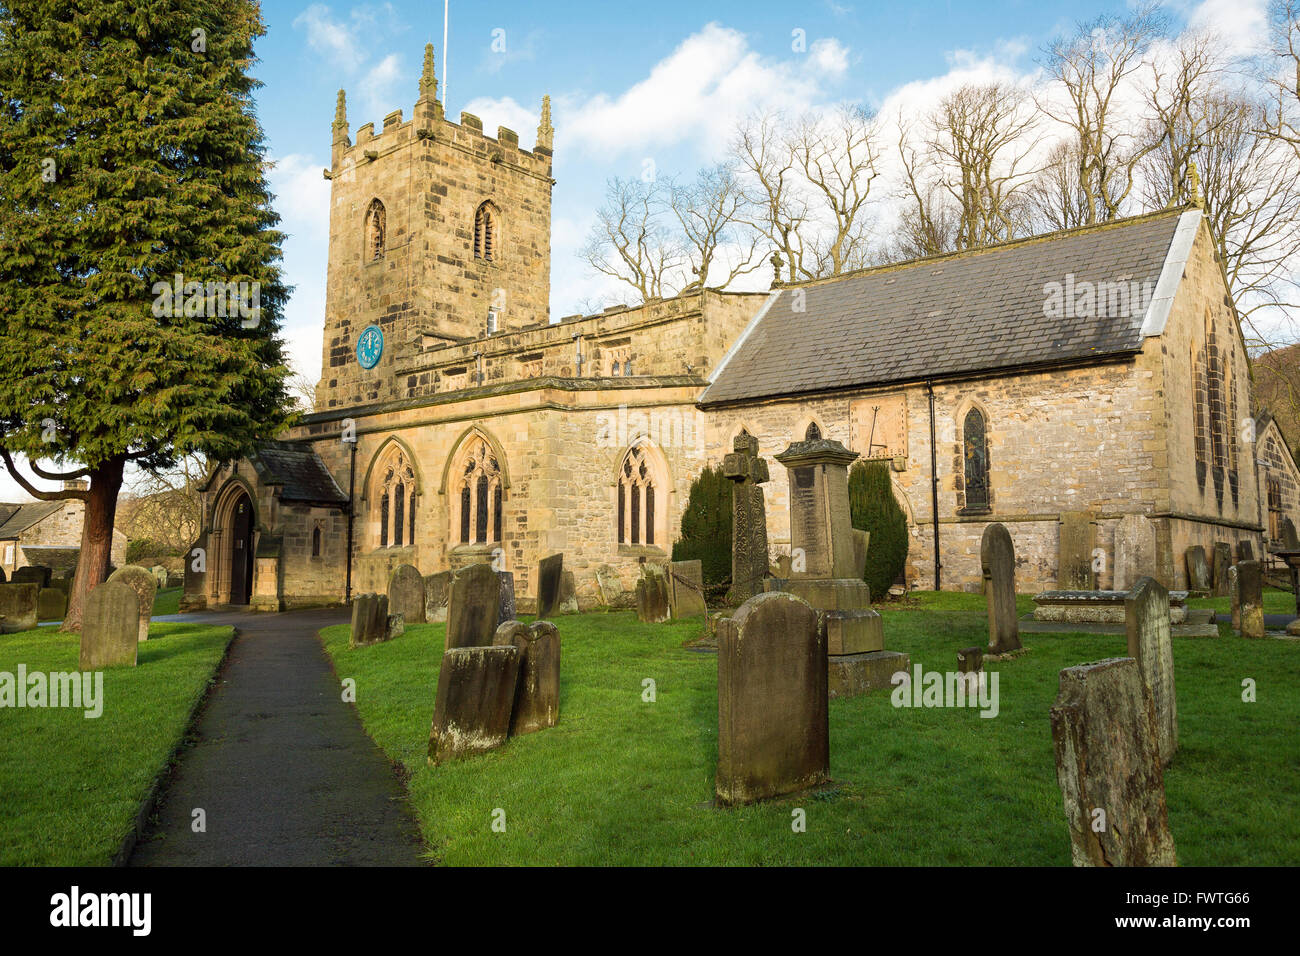 The parish church of St. Lawrence in the Peak District village of Eyam in Derbyshire, UK. Stock Photo